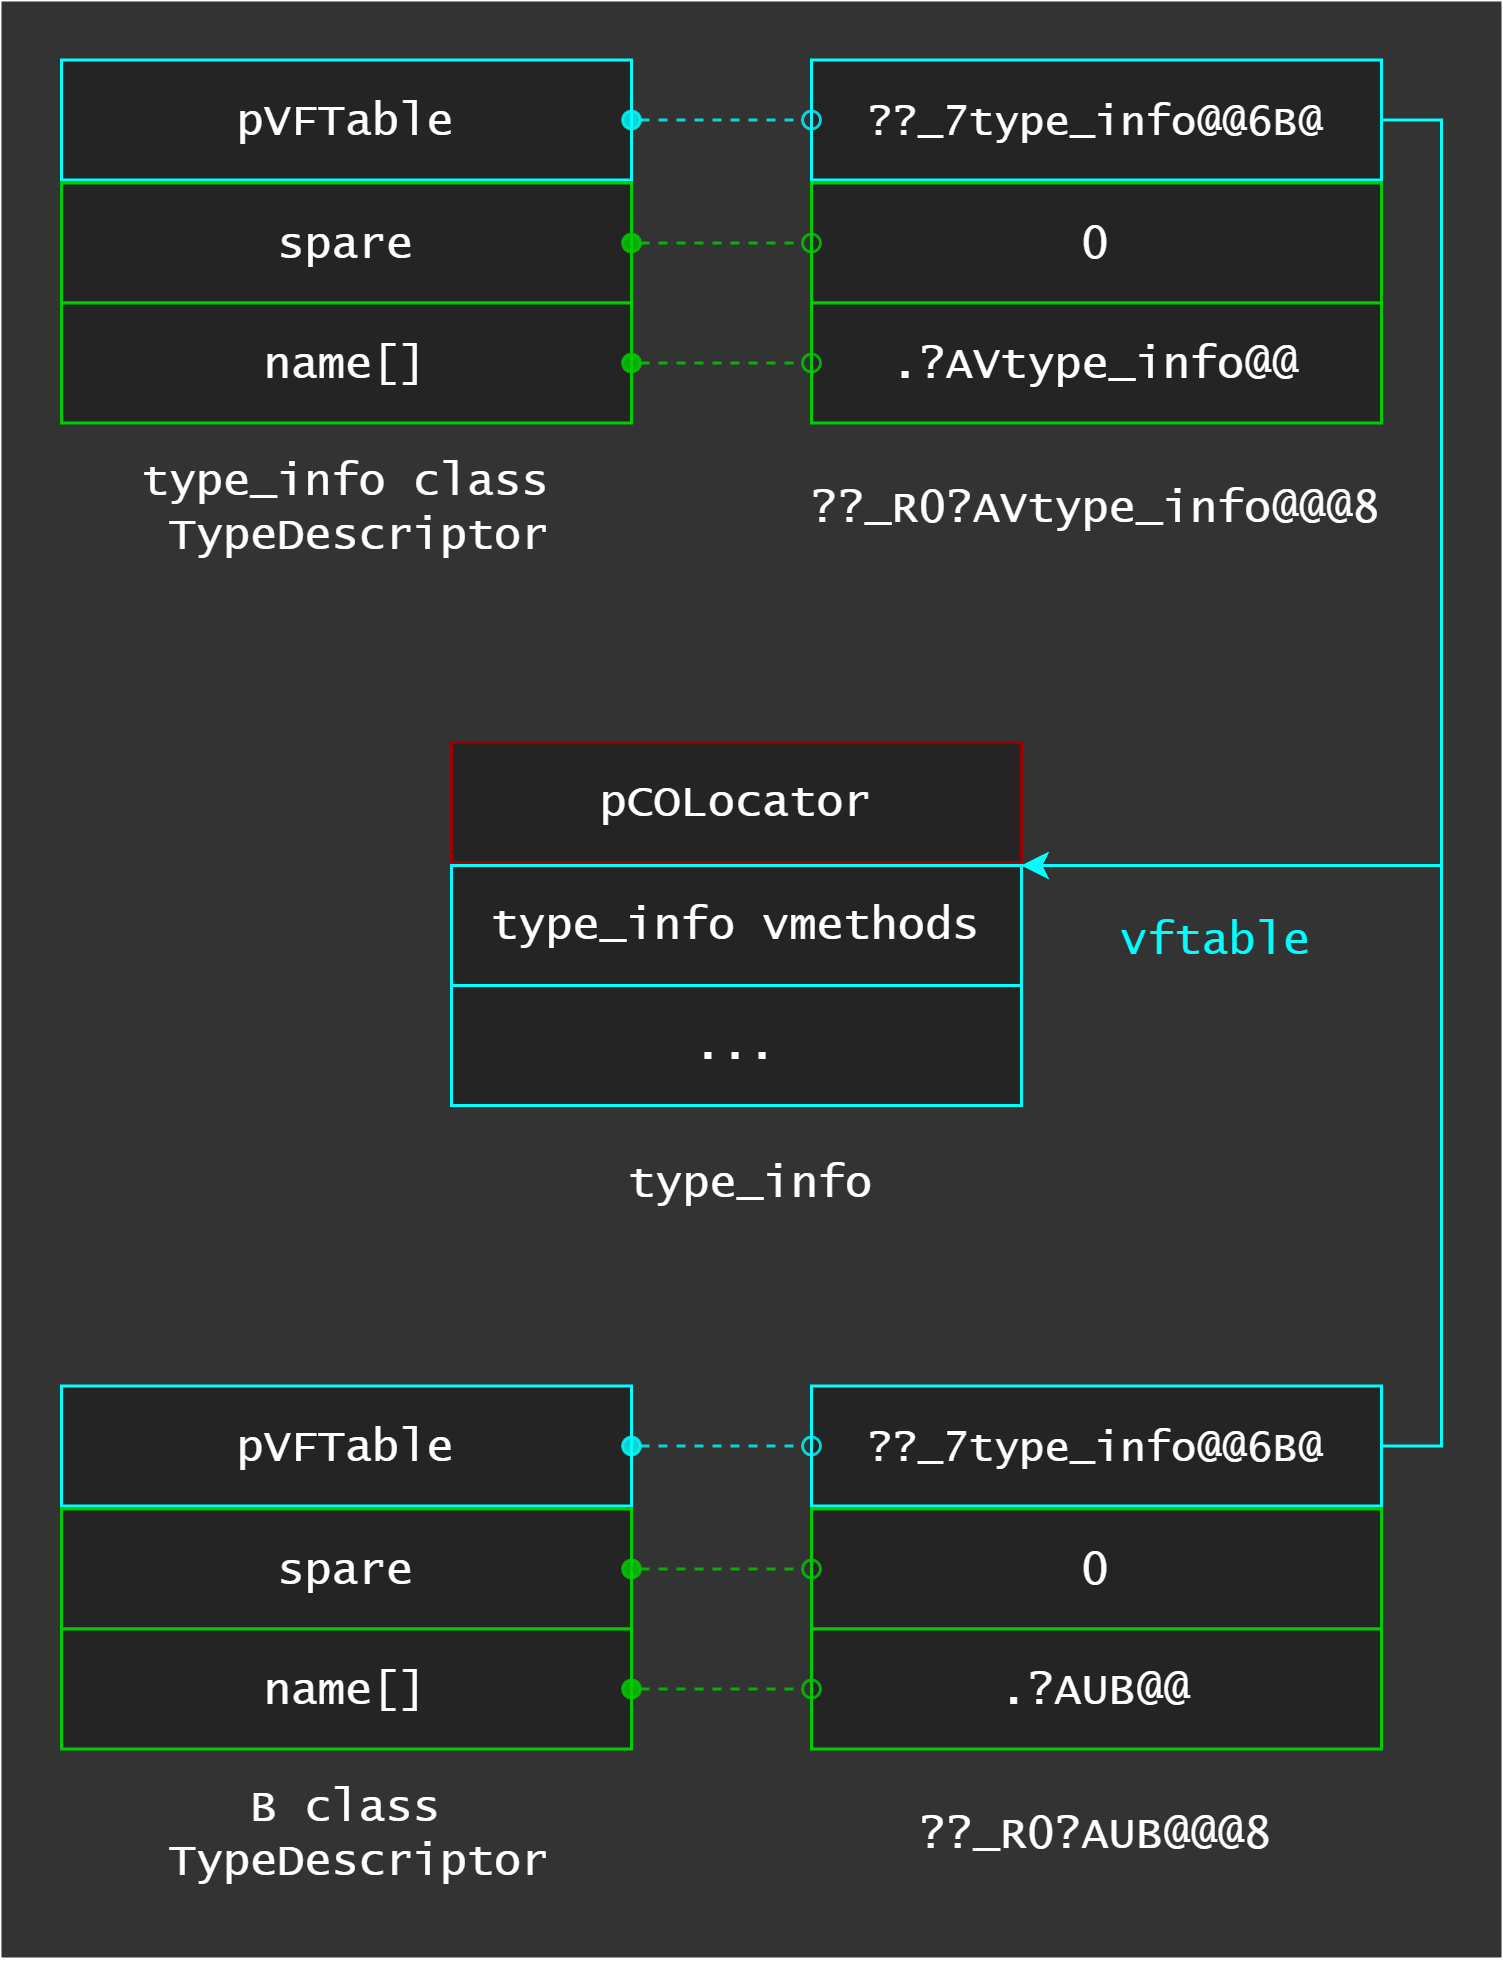 xrefs to type_info::vftable